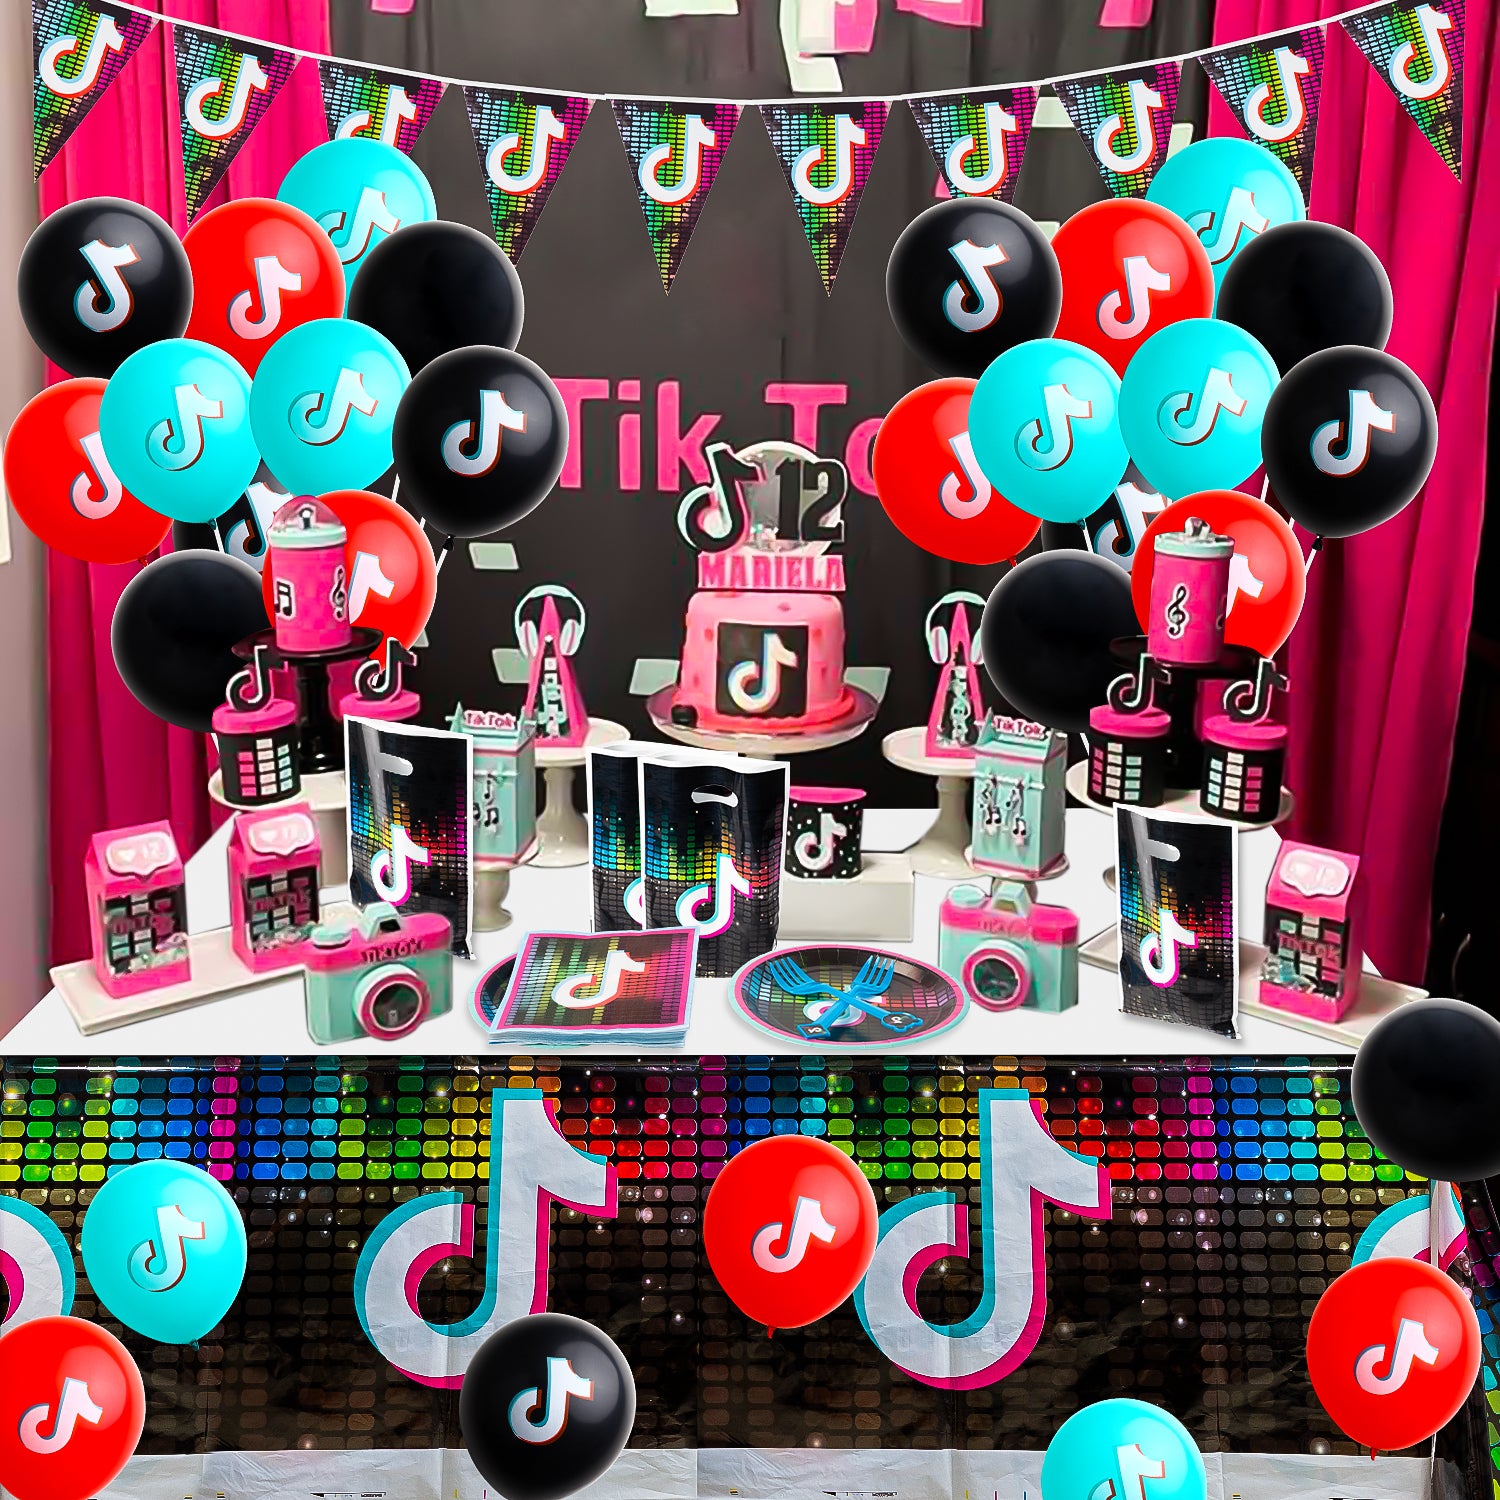 124Pcs Music Note Party Supplies Set, Include Party Pennants Balloons Table Cloth Gift Bags Plates Forks Napkin for Musical Note Theme Birthday Party Decorations, Supply Pack Serves 20 Guests